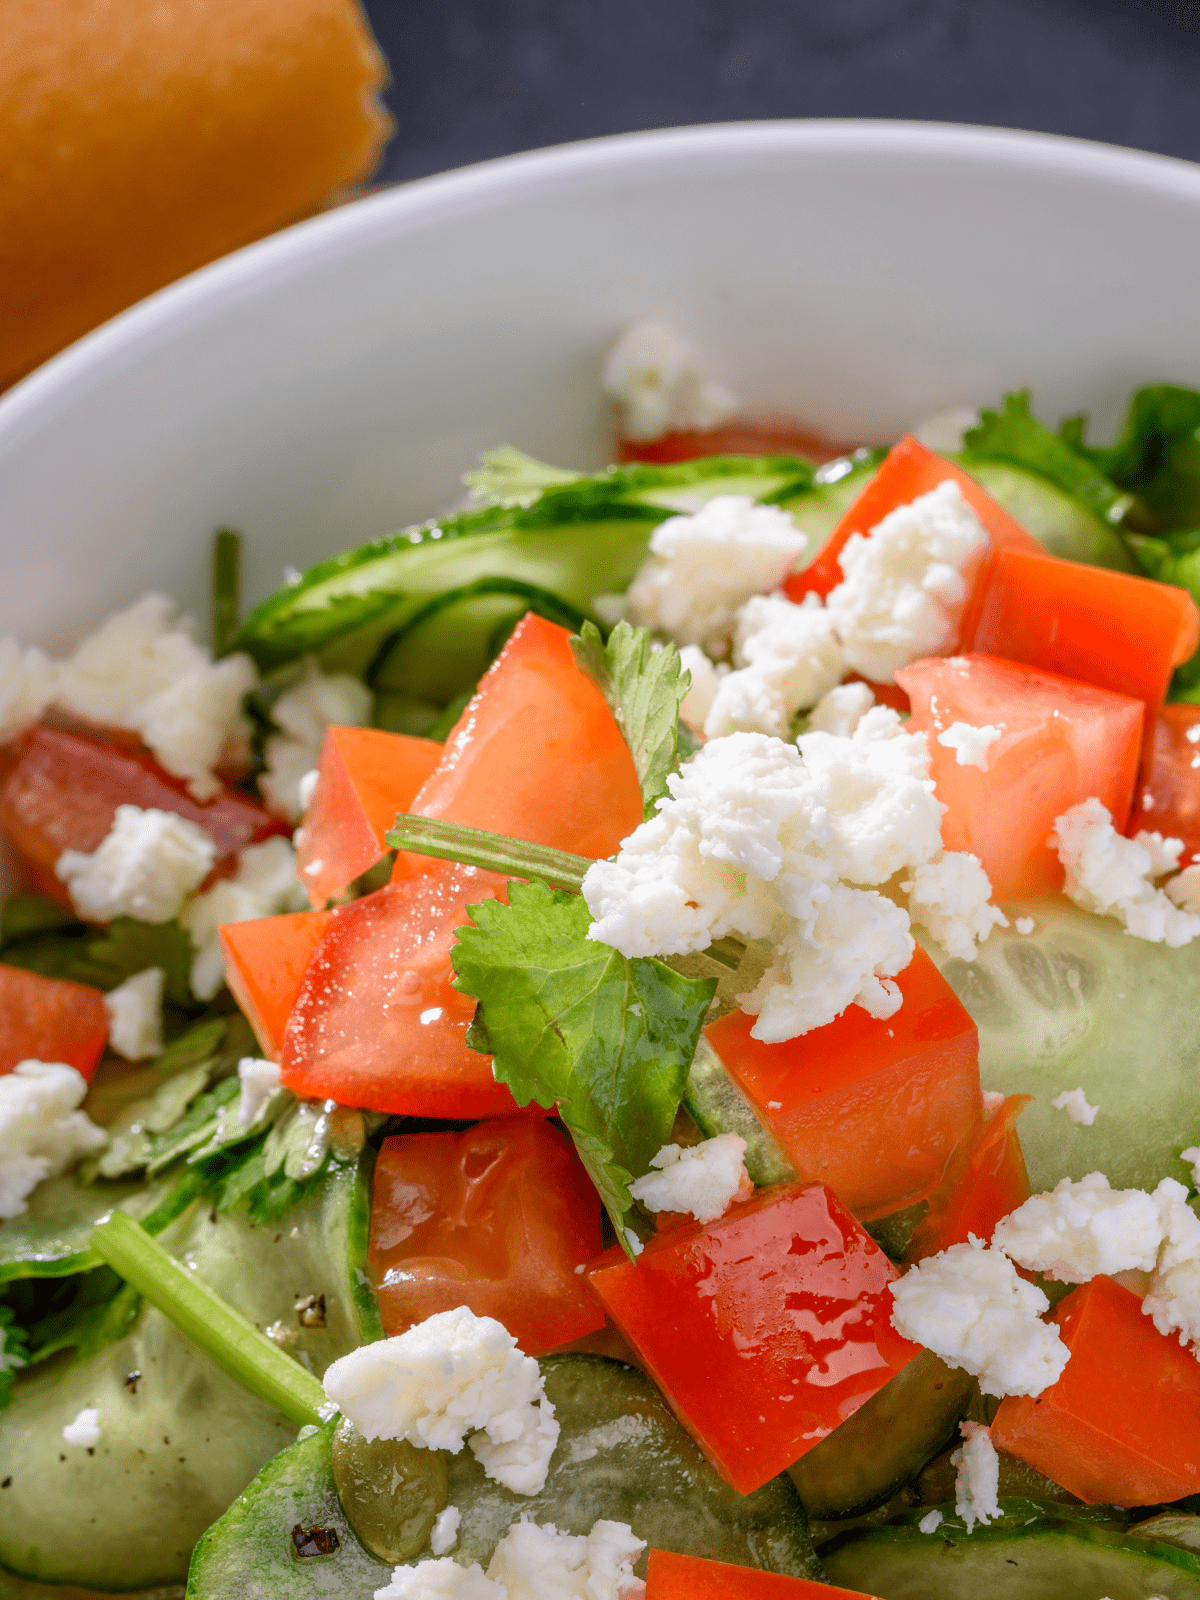 Cucumber and tomato salad topped with herbs.